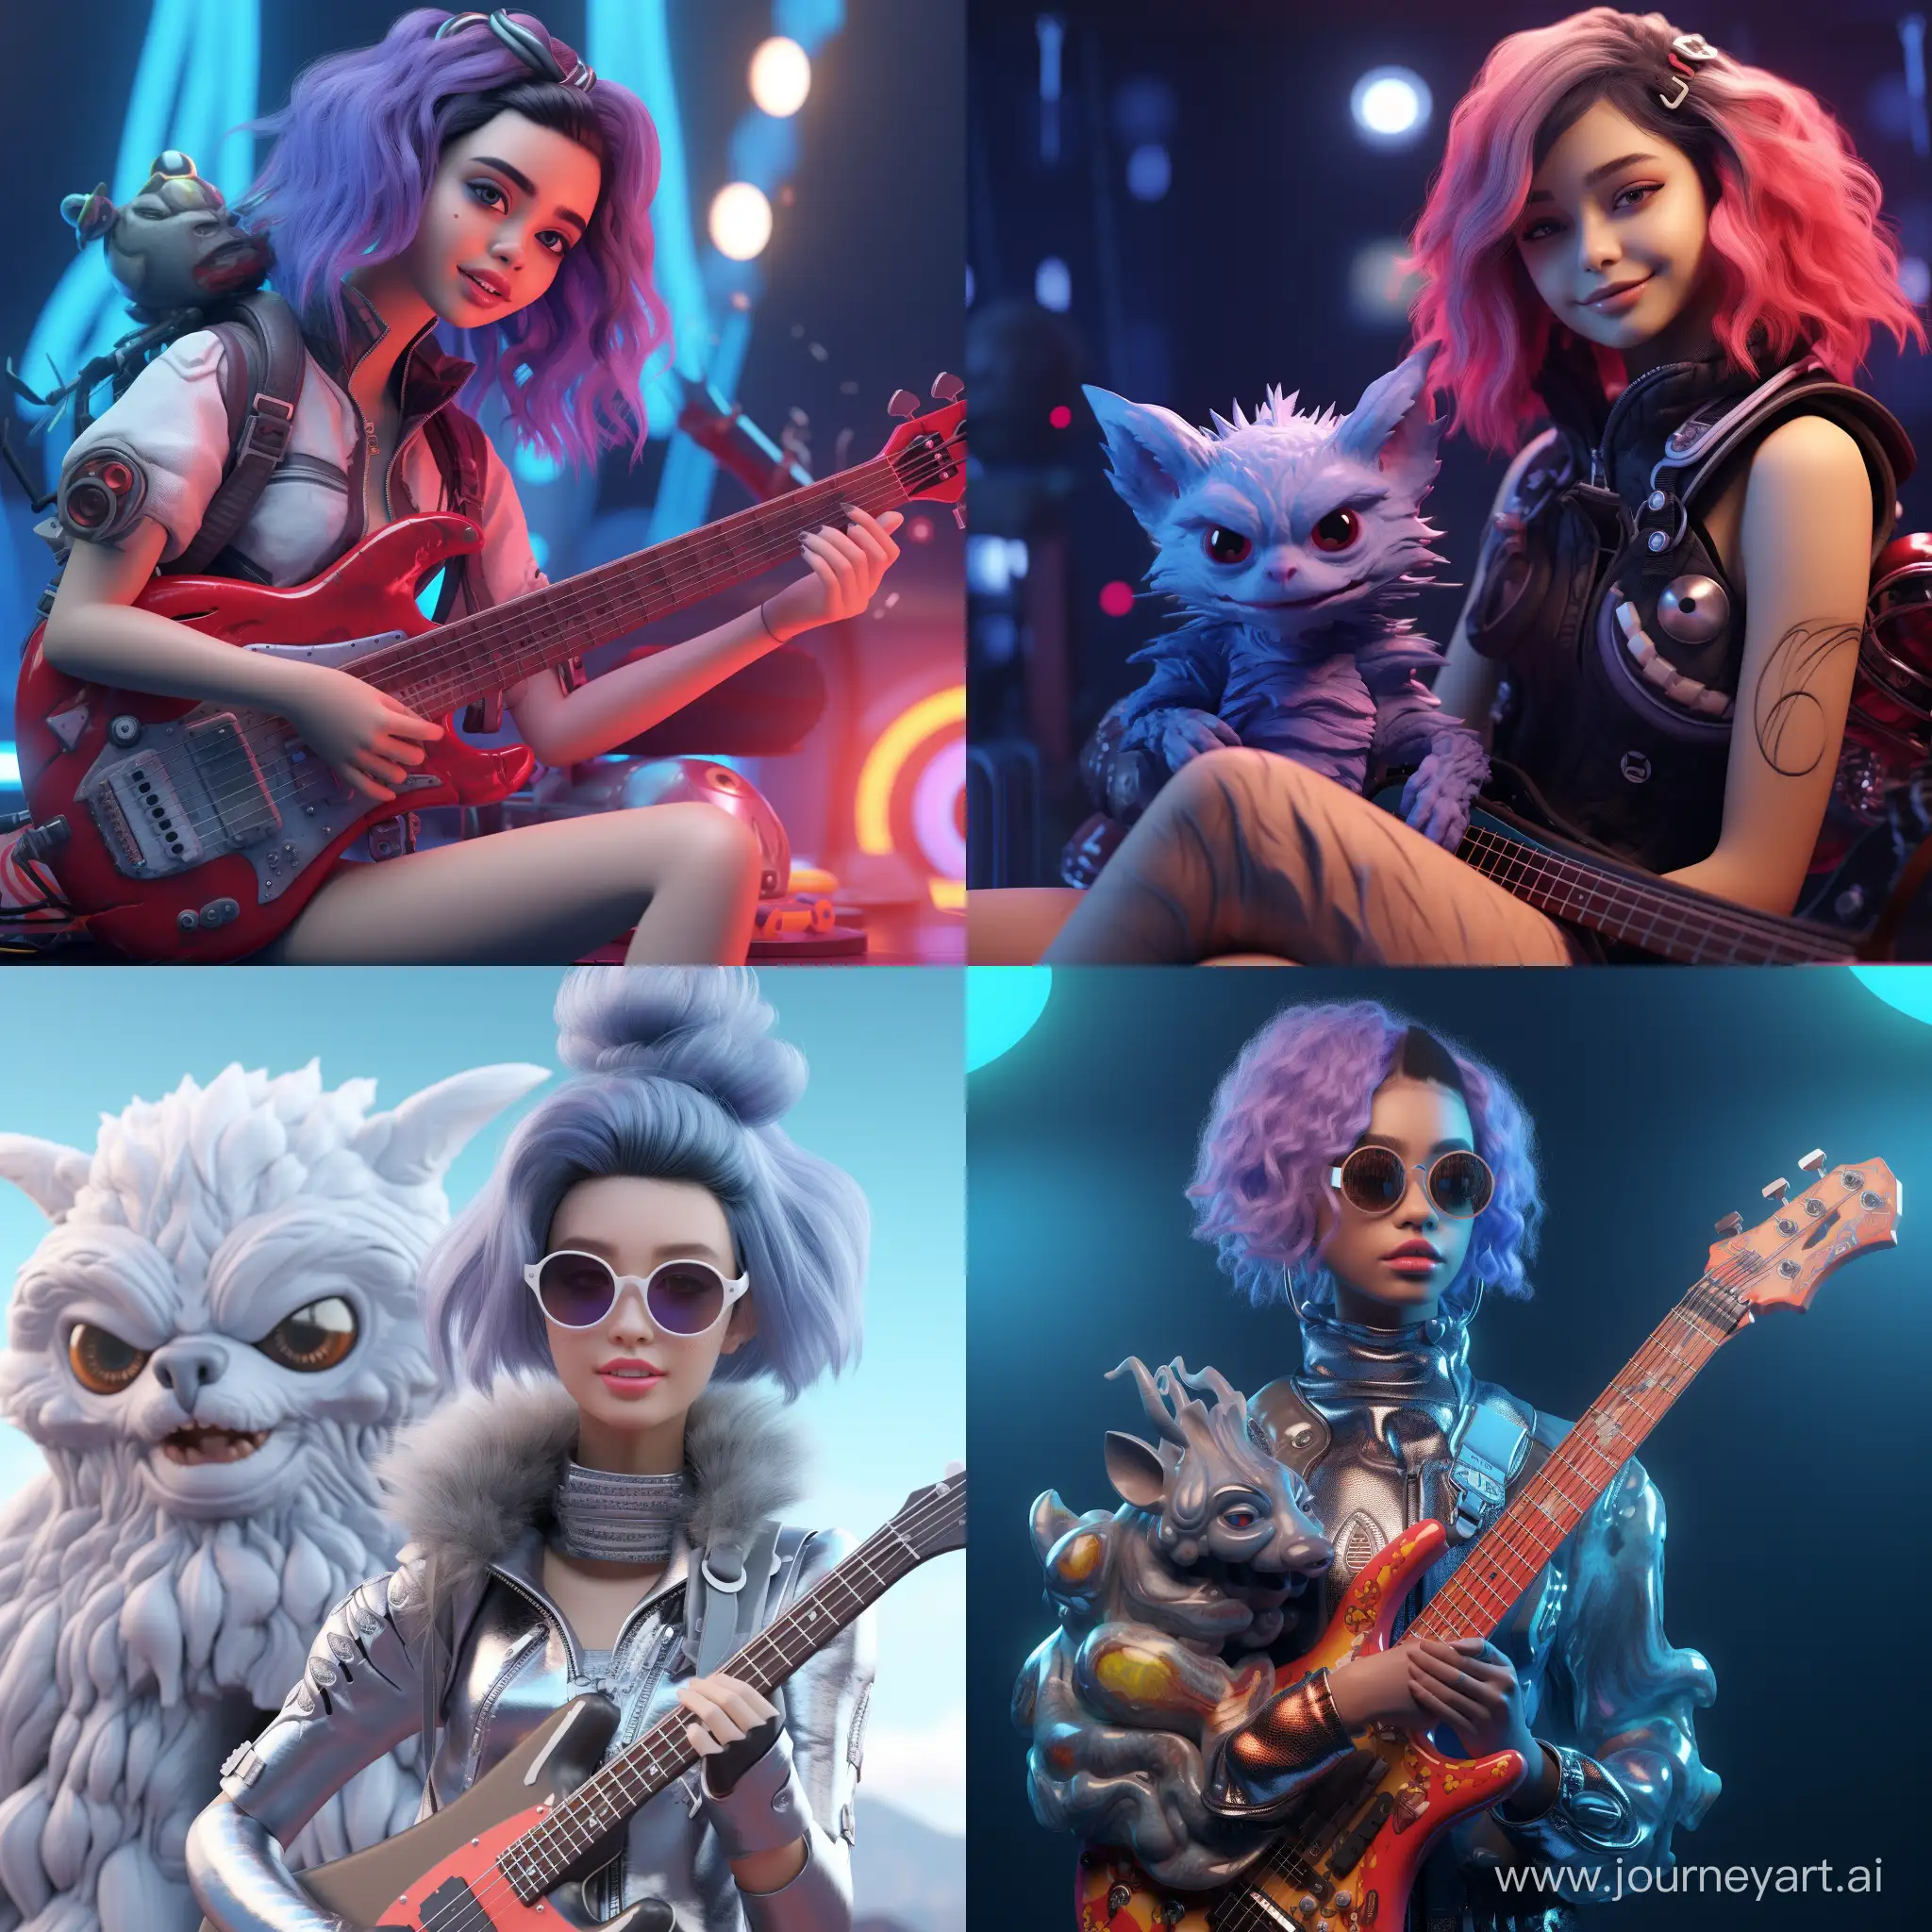 Futuristic-Musician-and-Digital-Cute-Monster-in-3D-Rendered-Bliss